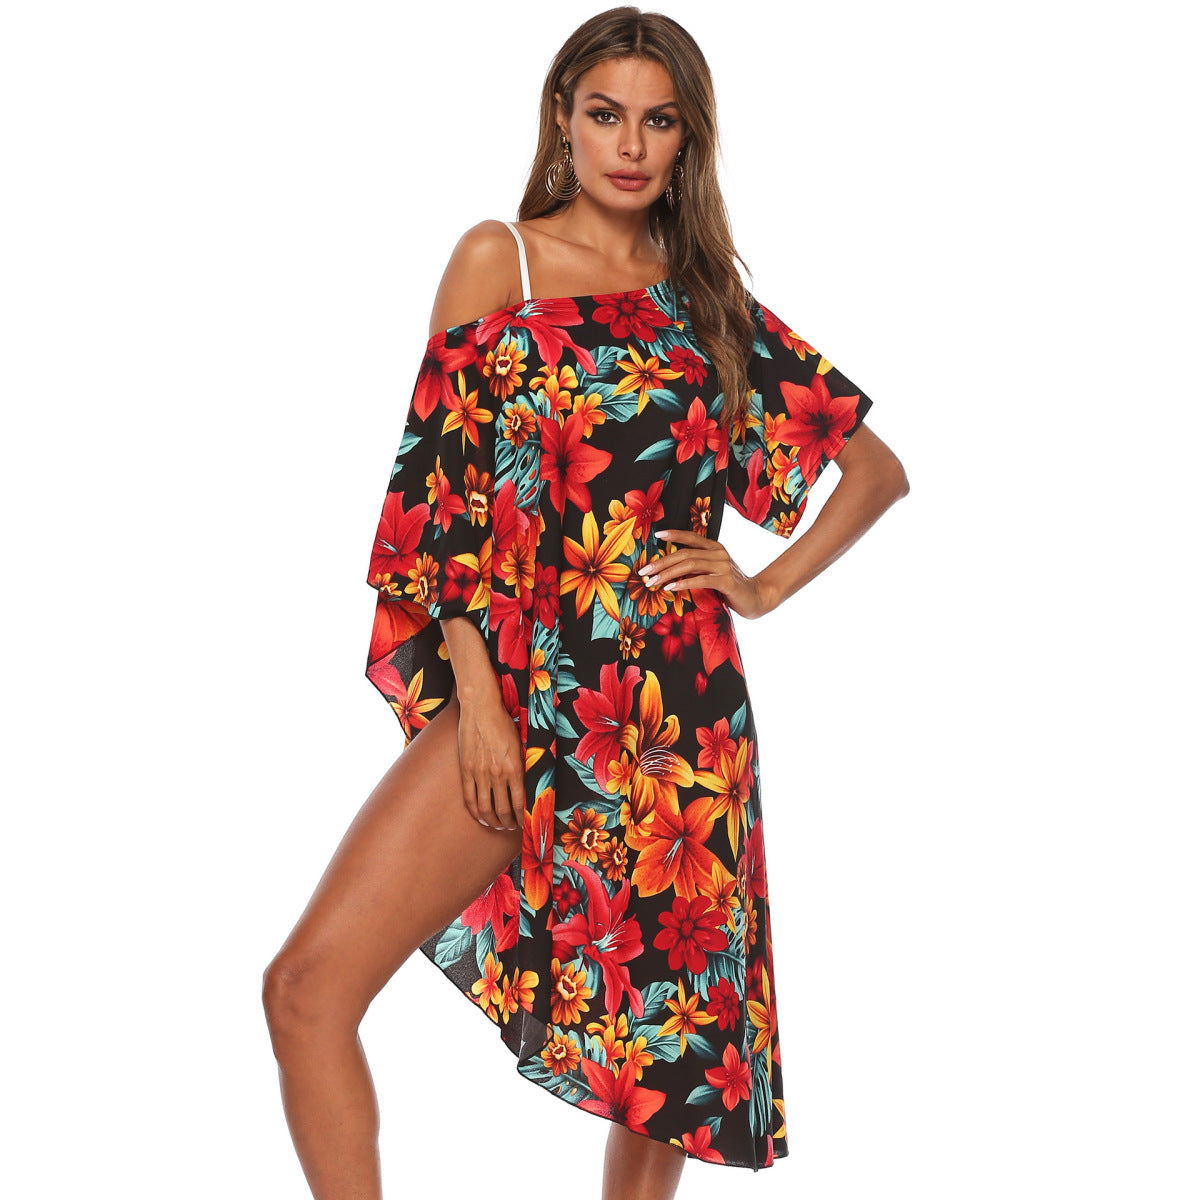 One-Shoulder Floral Print Asymmetrical Beach Cover-Up